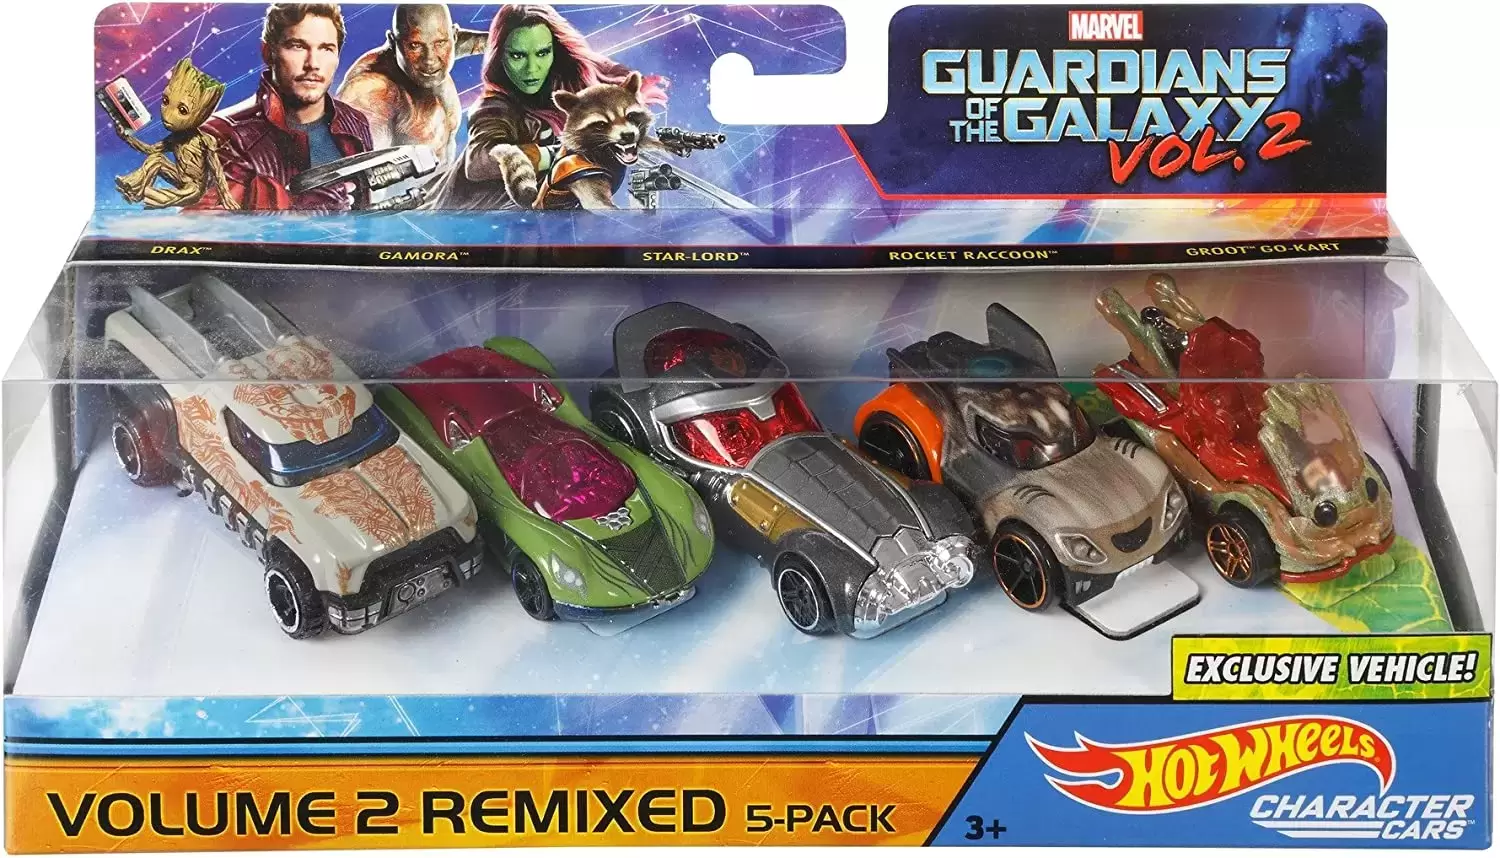 Marvel Character Cars - Guardians of the Galaxy Vol.2 - Volume 2 Remixed 5-Pack